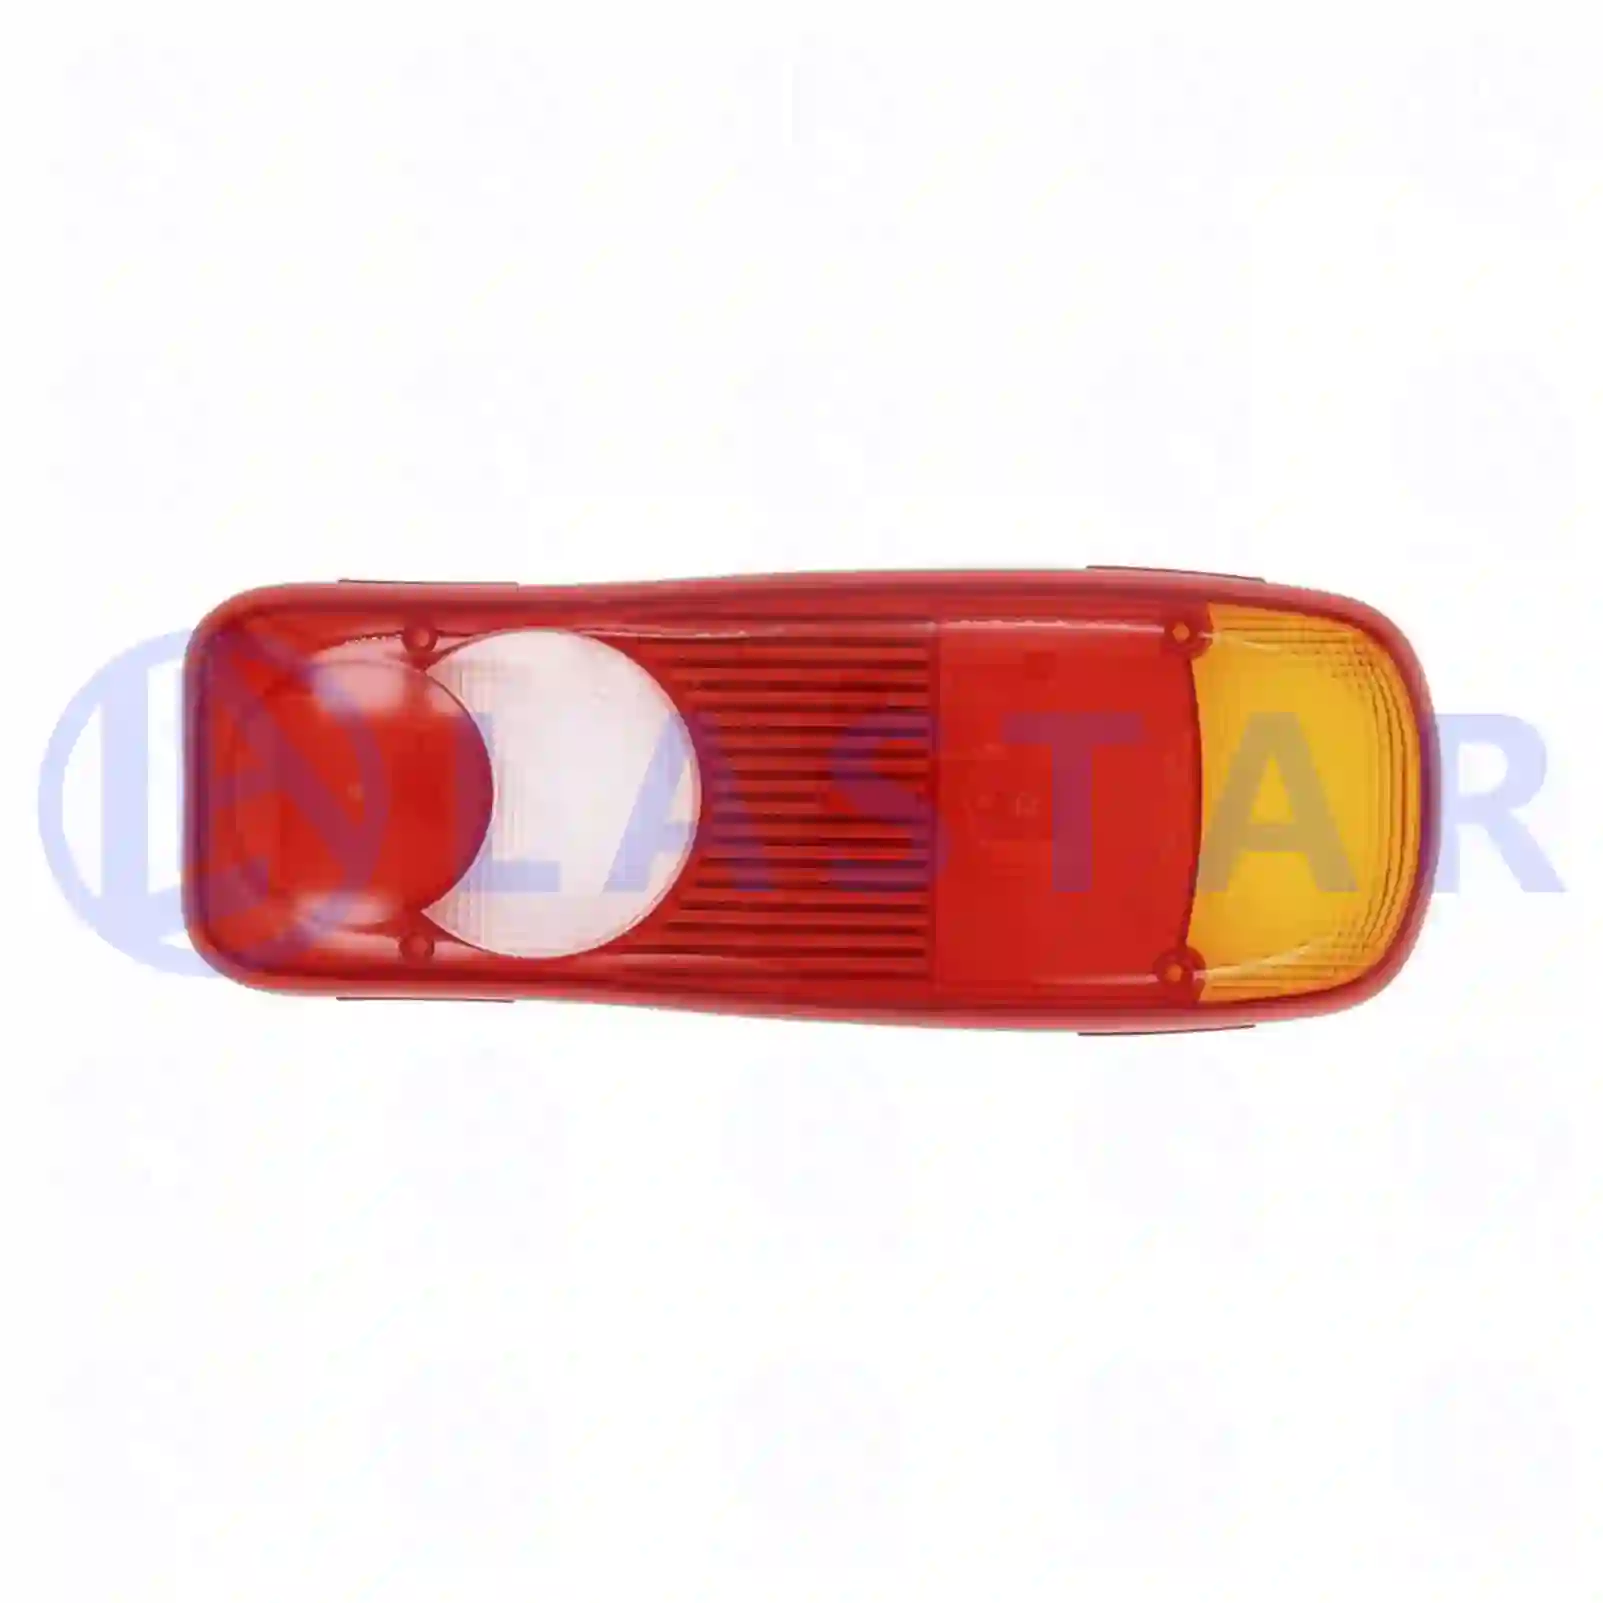 Tail lamp glass, 77711082, 1451482, 5001847153, 7484553916, 20537280, 84553916, ZG21082-0008 ||  77711082 Lastar Spare Part | Truck Spare Parts, Auotomotive Spare Parts Tail lamp glass, 77711082, 1451482, 5001847153, 7484553916, 20537280, 84553916, ZG21082-0008 ||  77711082 Lastar Spare Part | Truck Spare Parts, Auotomotive Spare Parts